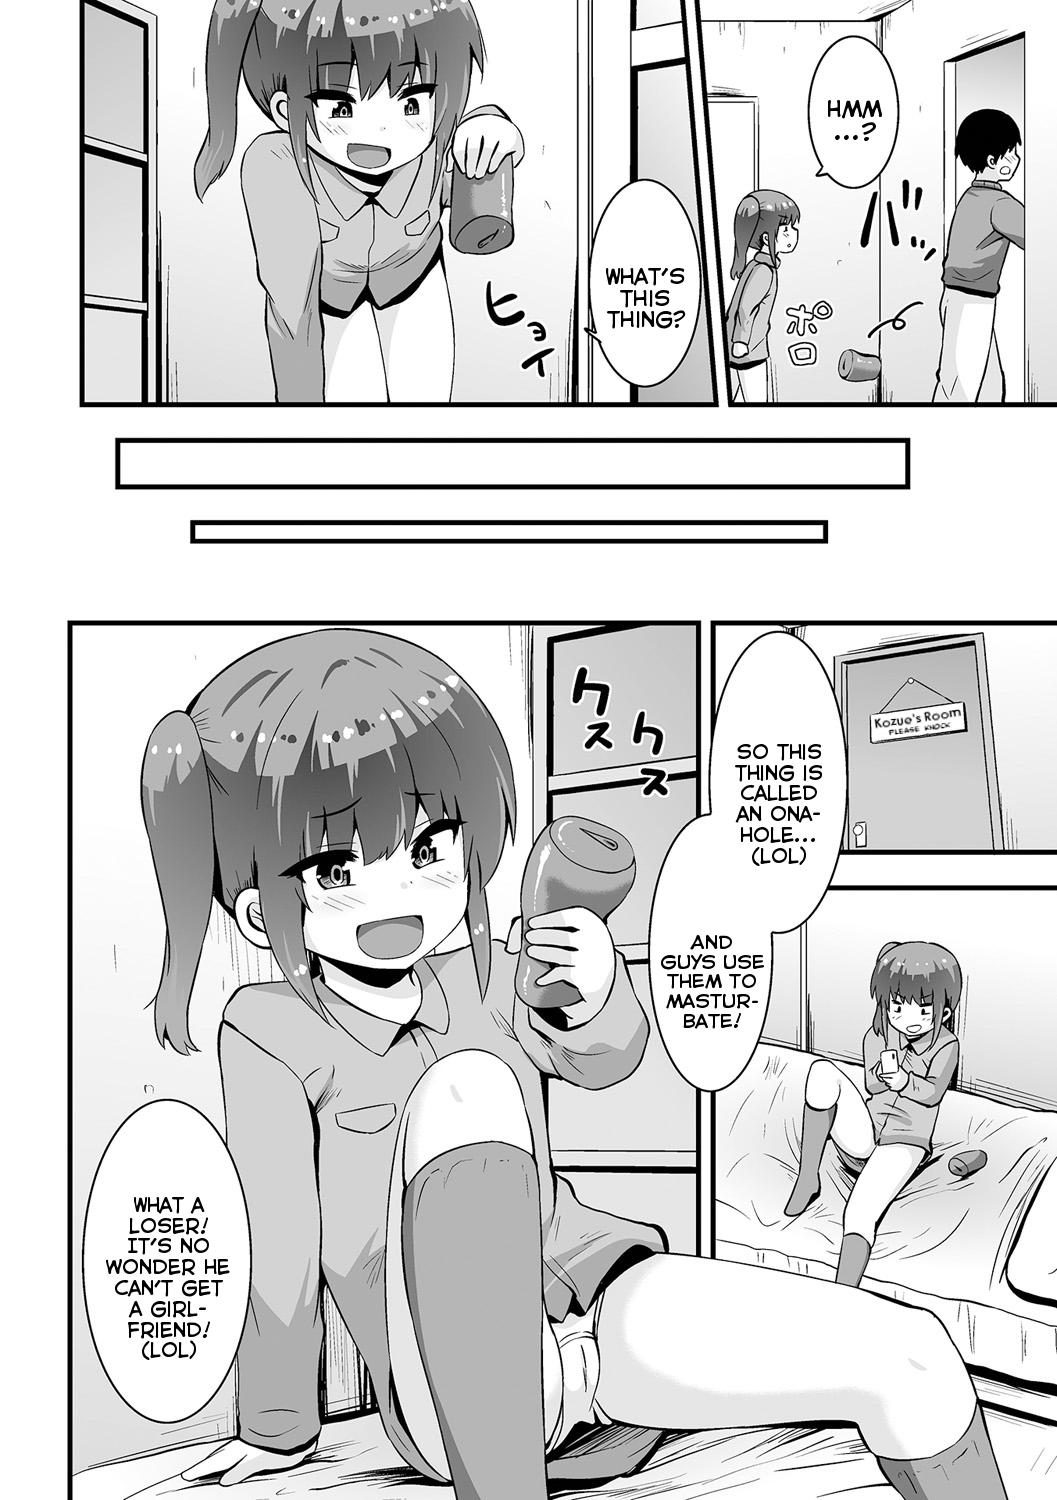 Slave Onaho o Baka ni shi Onaho ni Sareta Imouto | The Little Sister Who Made Fun Of Onaholes and Was Then Turned Into One (COMIC Mate Legend Vol. 50 2023-04 Nudity - Page 2